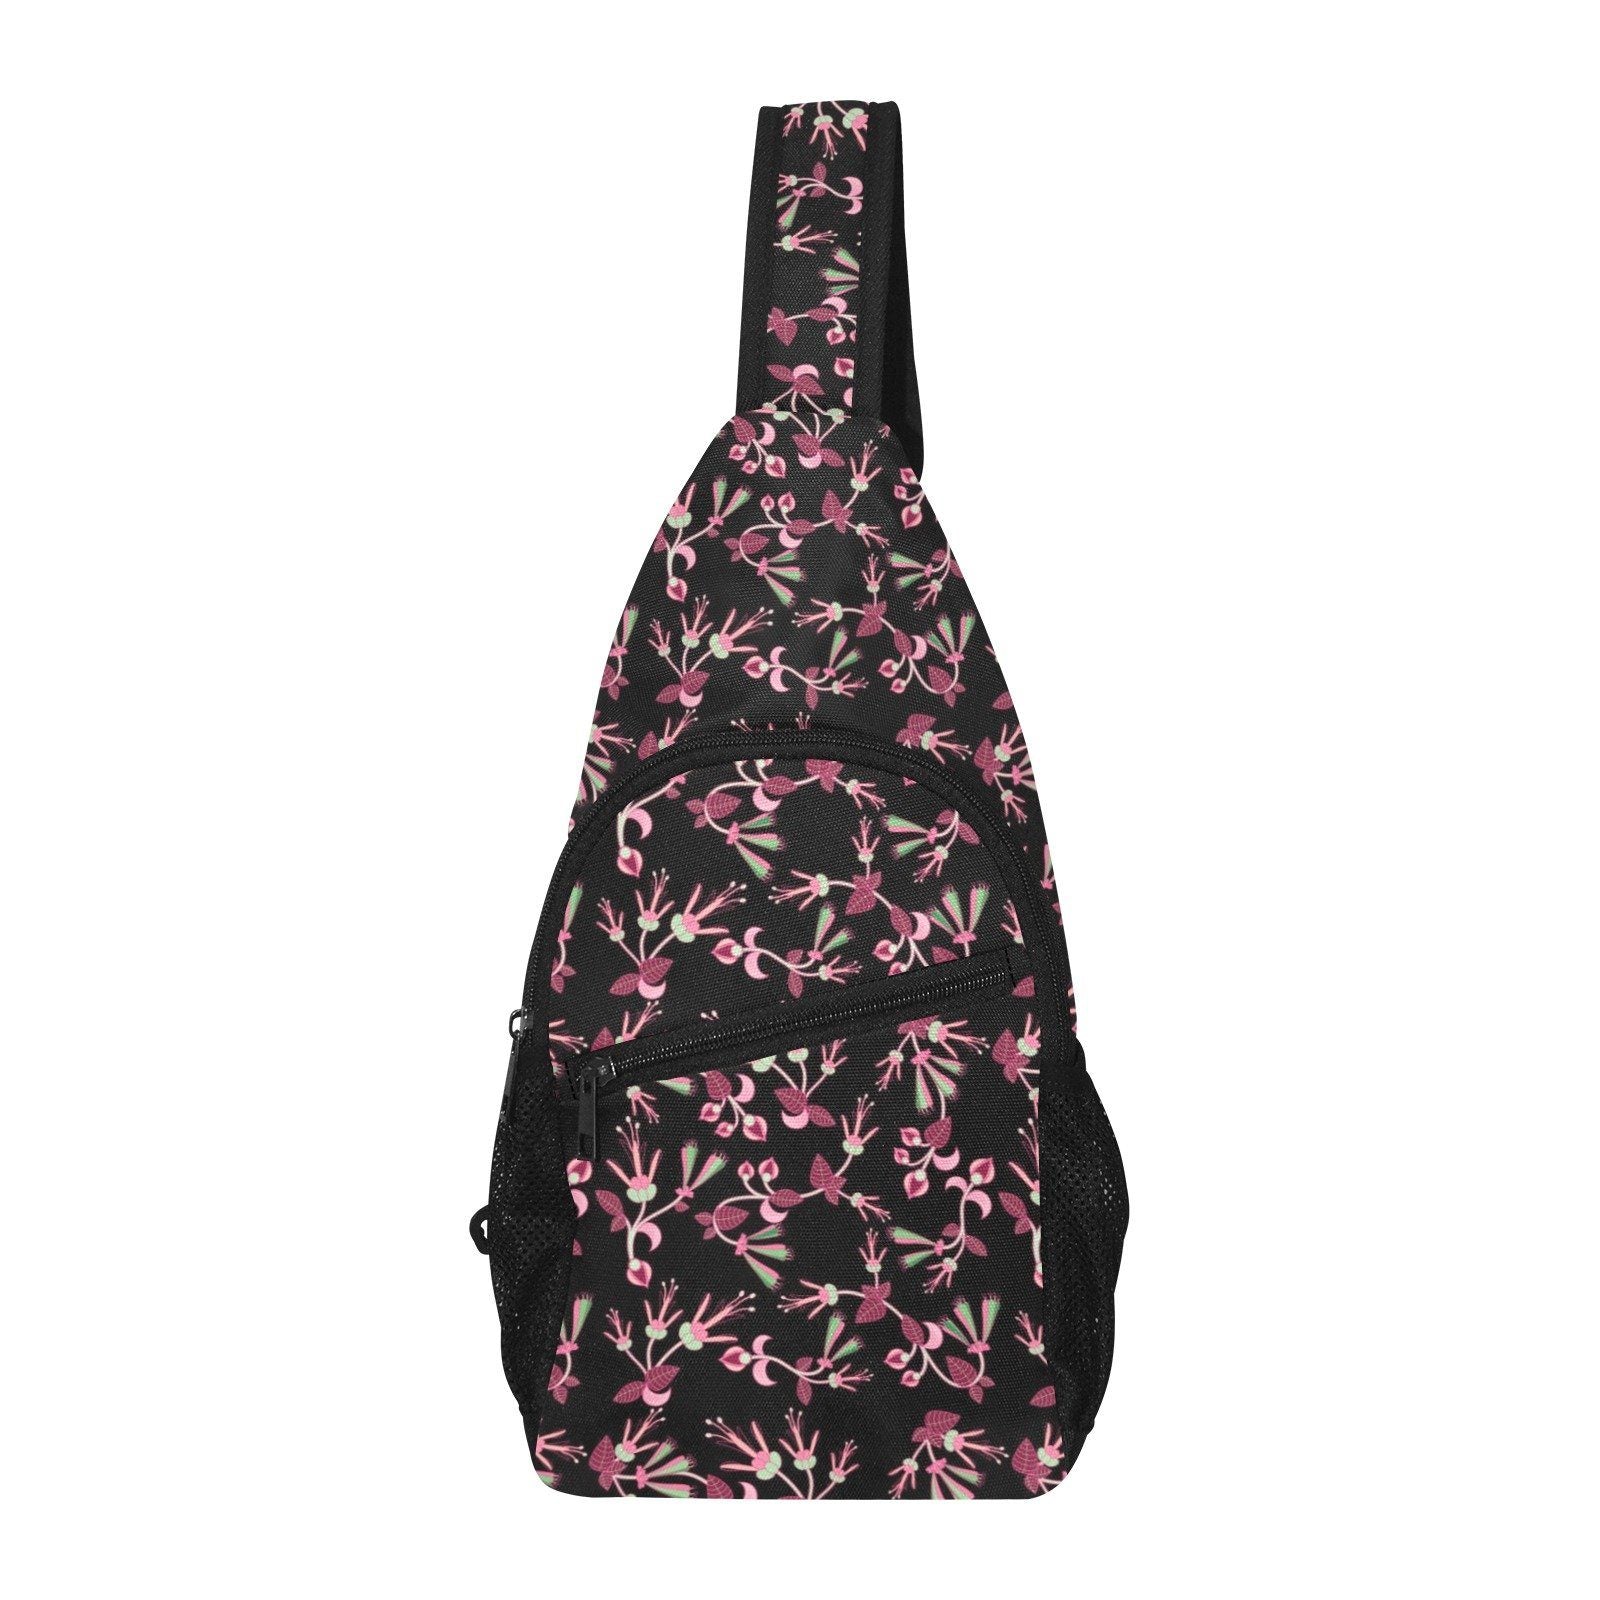 Floral Green Black All Over Print Chest Bag (Model 1719) All Over Print Chest Bag (1719) e-joyer 